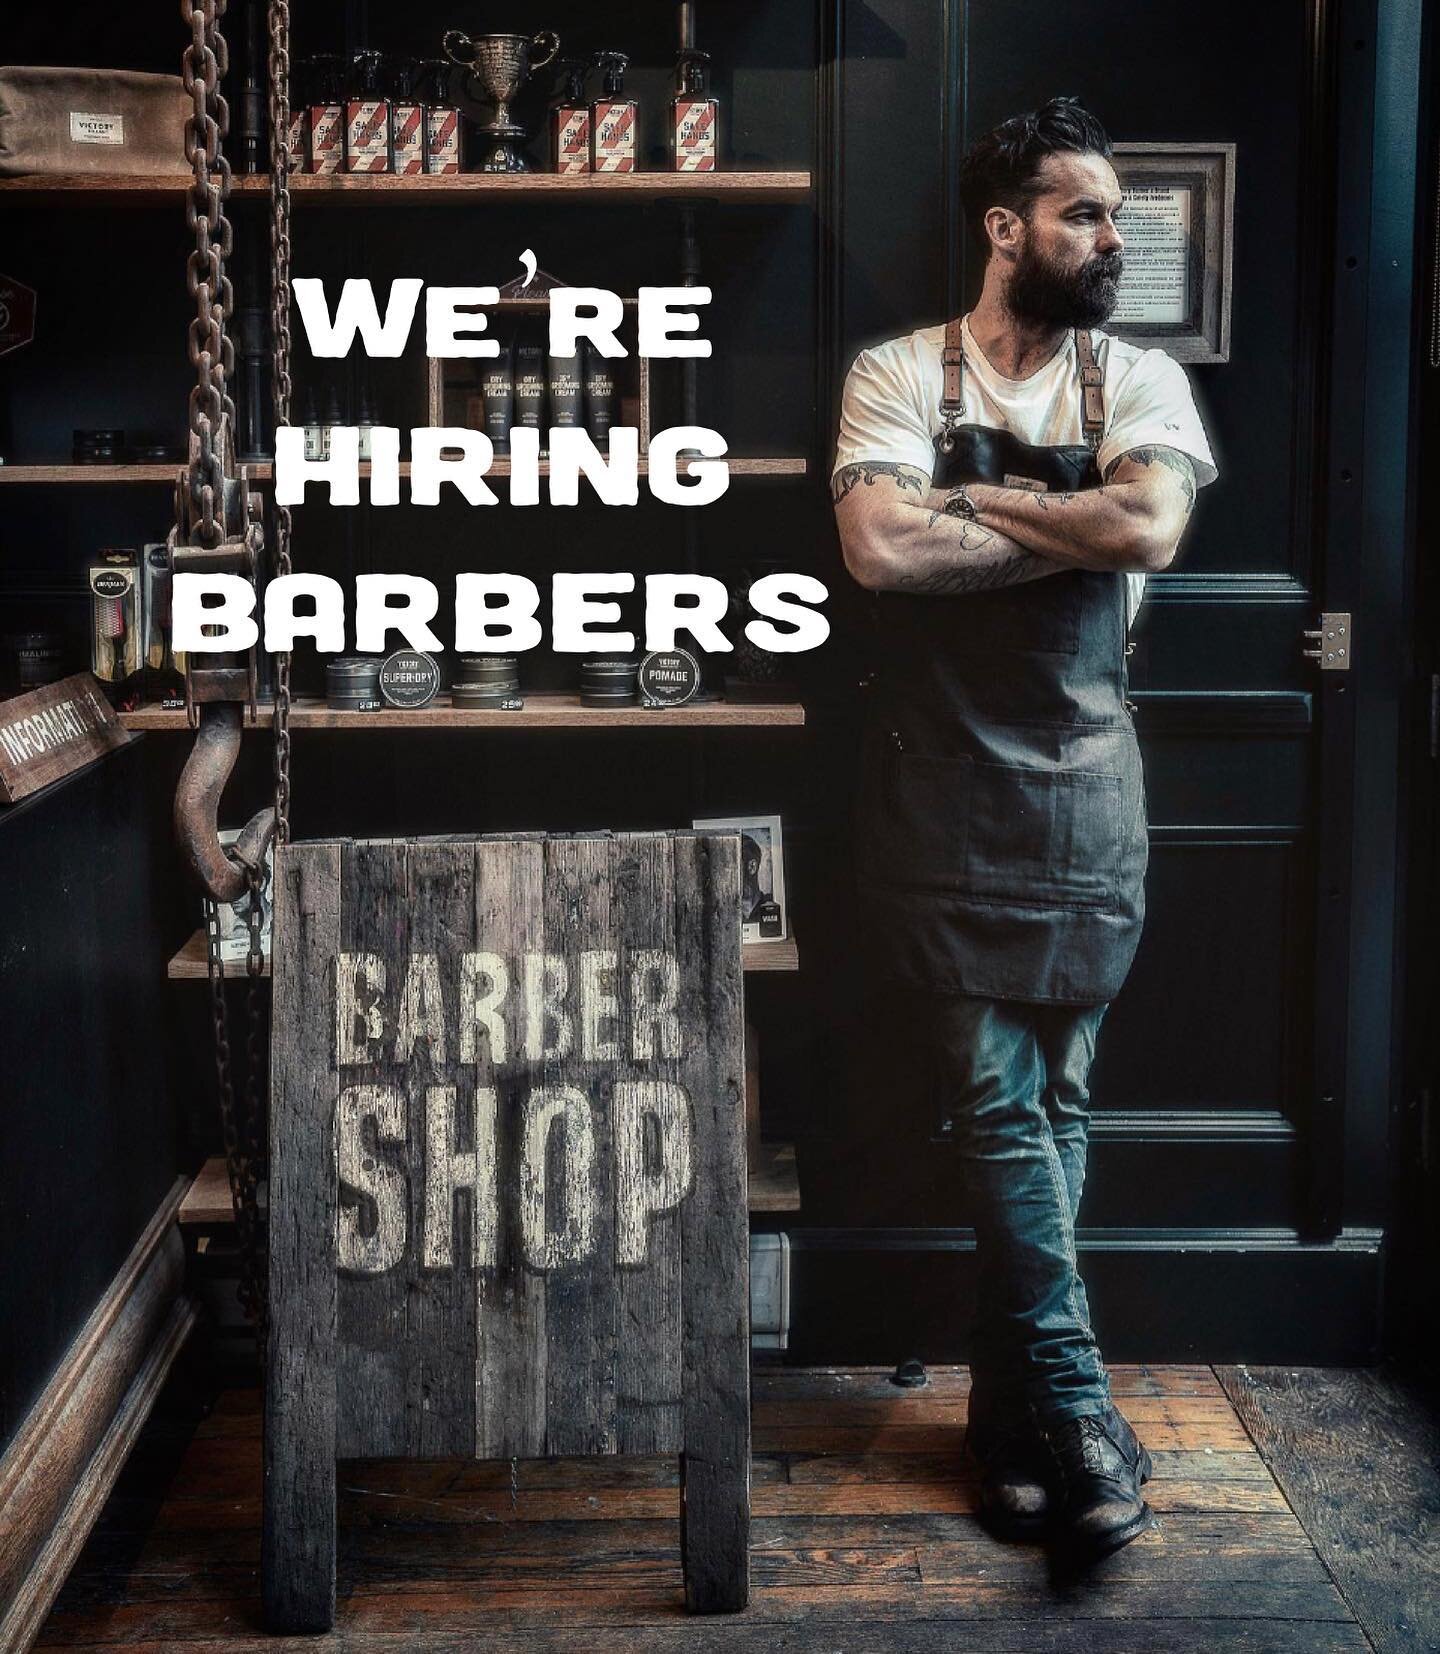 Looking for a fresh face to join the team @victorygastown .

Apply in person at 
77 E Cordova St
Vancouver BC.

Or DM us and introduce yourself.